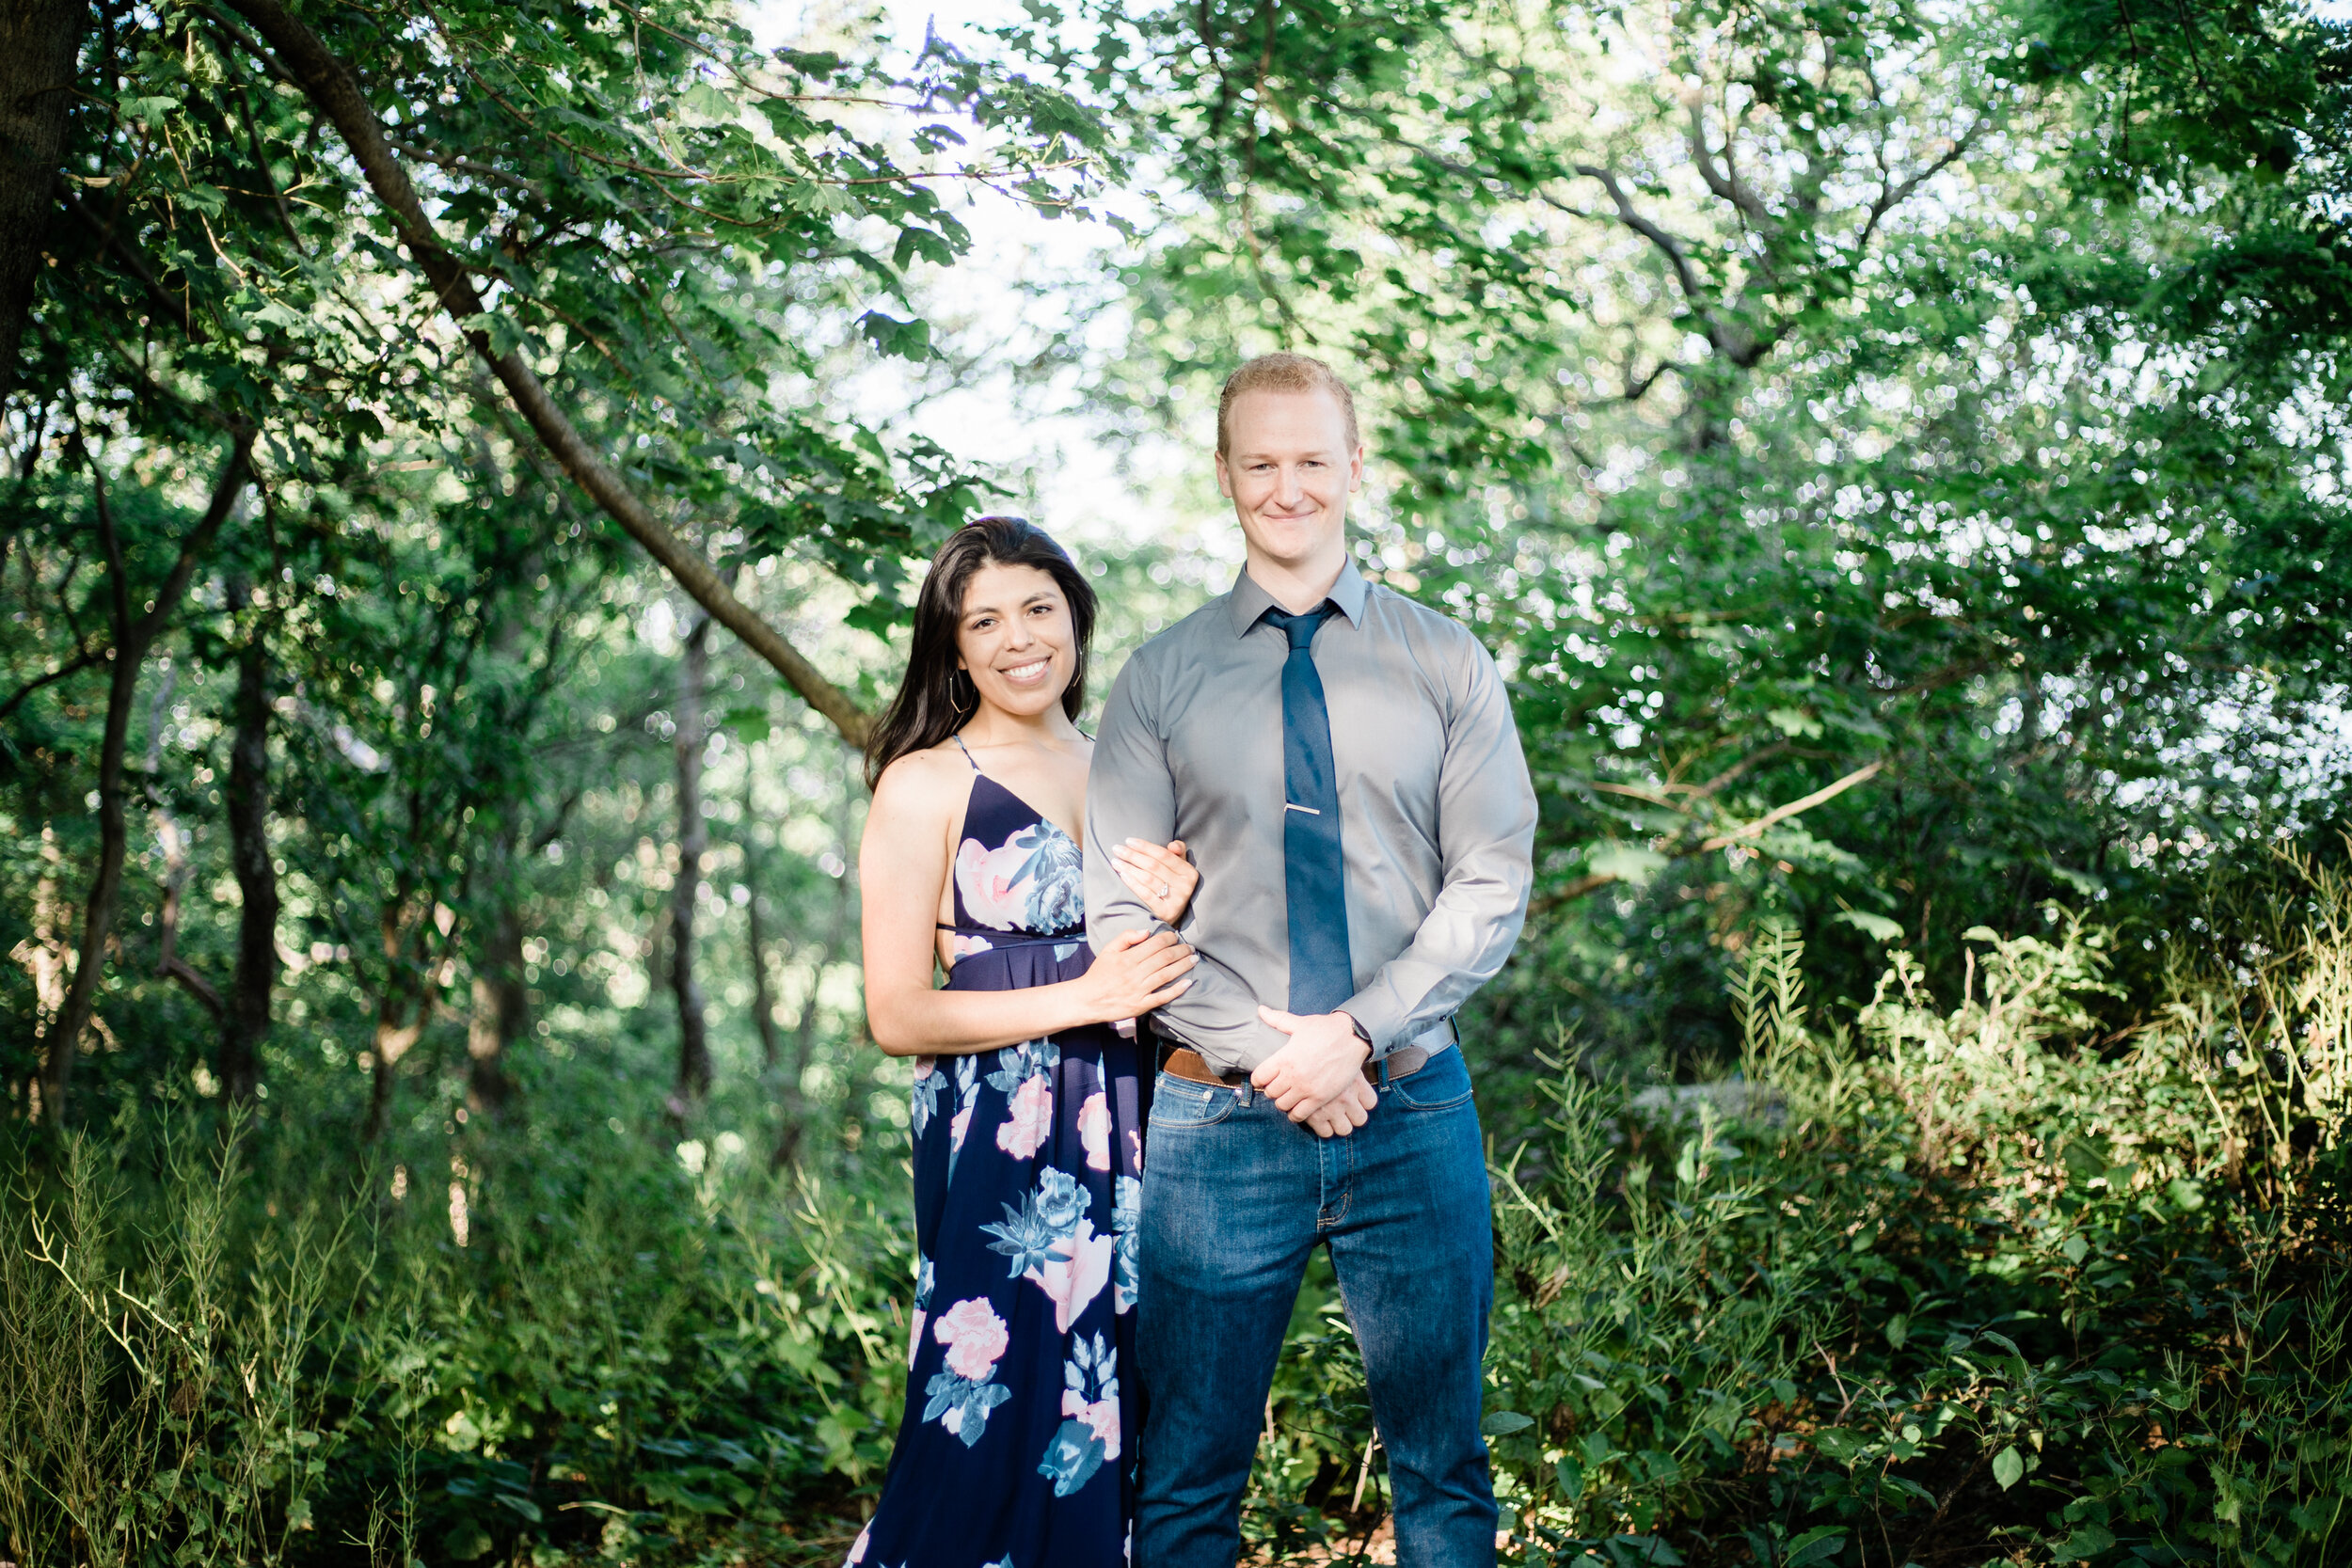 Engagement Session at High Rock Mountain in Western Maryland by Megapixels Media Photography best husband and wife wedding photographers-21.jpg